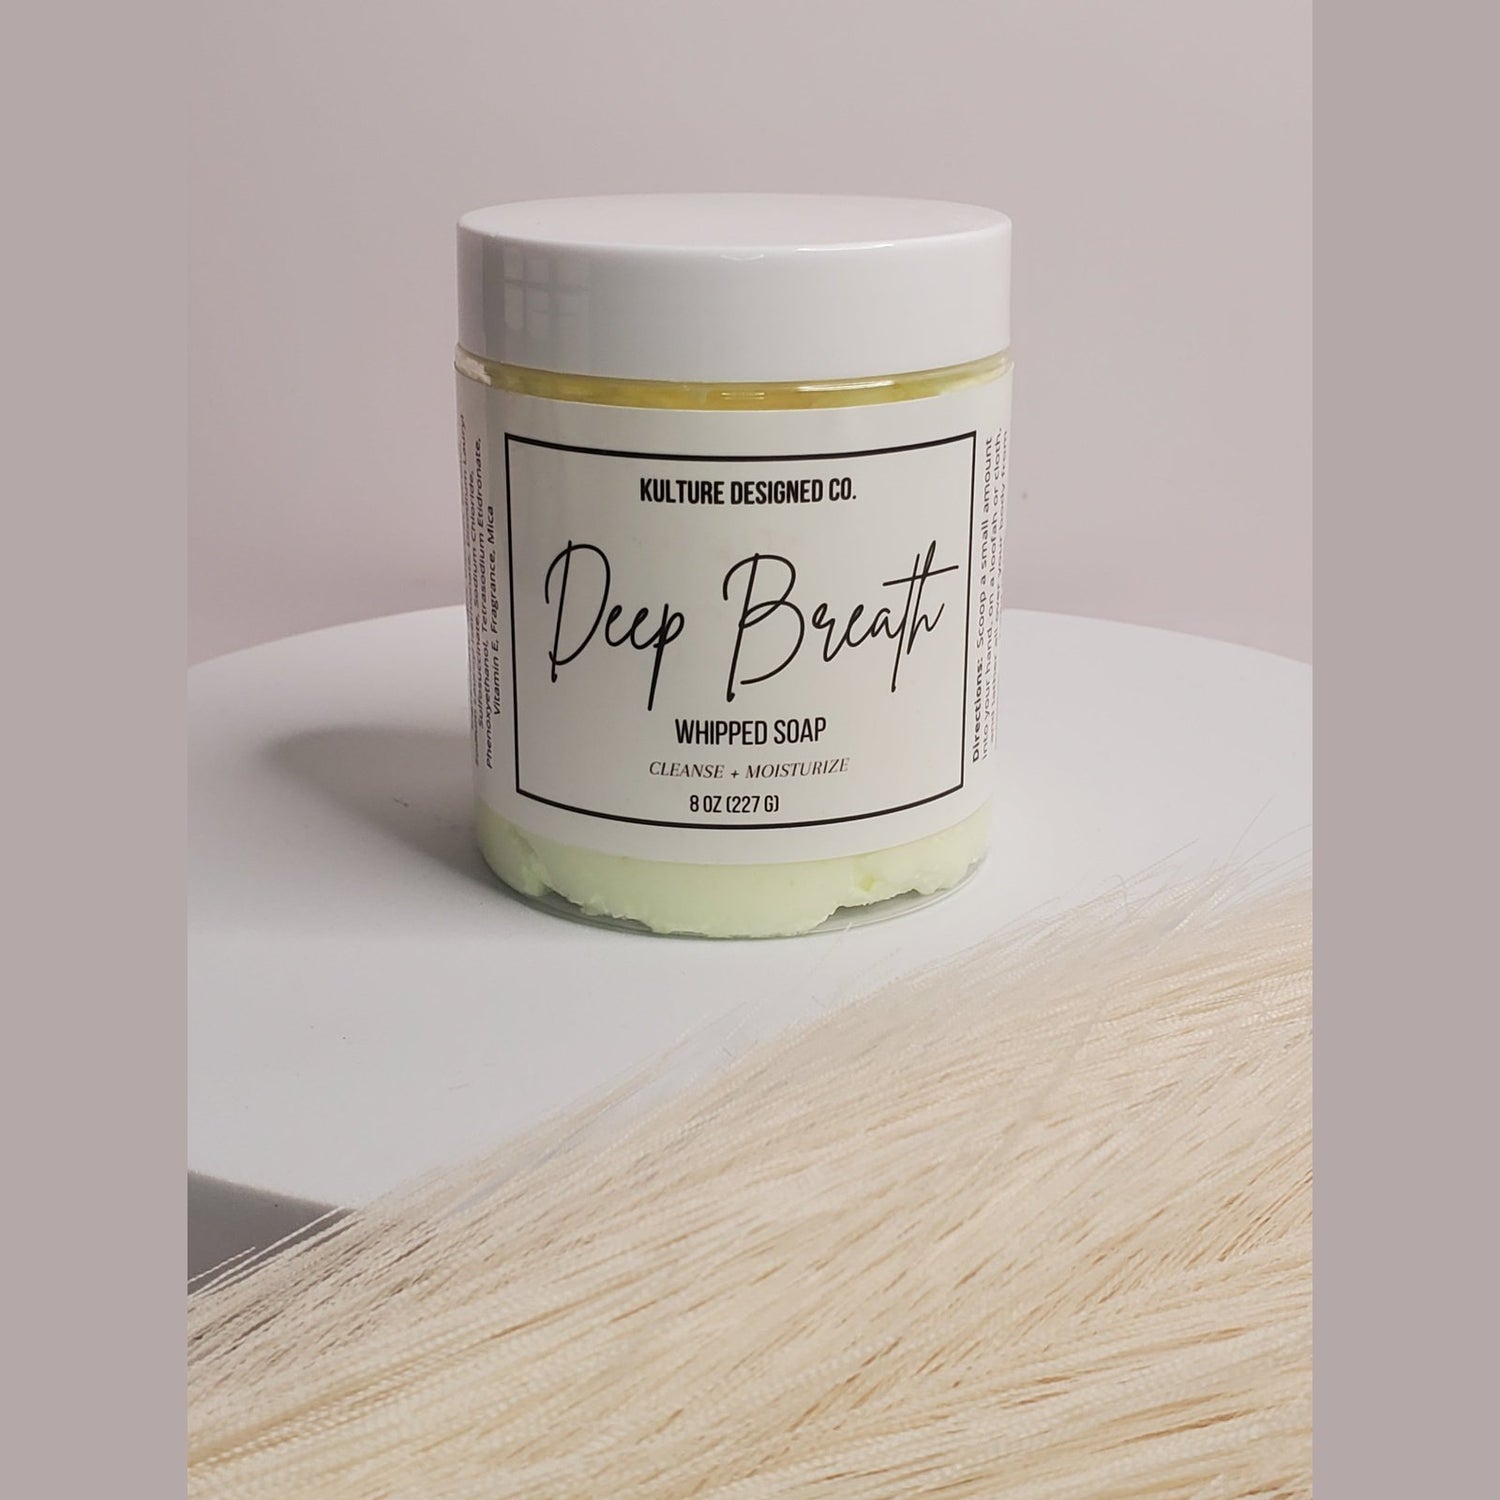 Deep Breath | Whipped Soap - Kulture Designed Co.